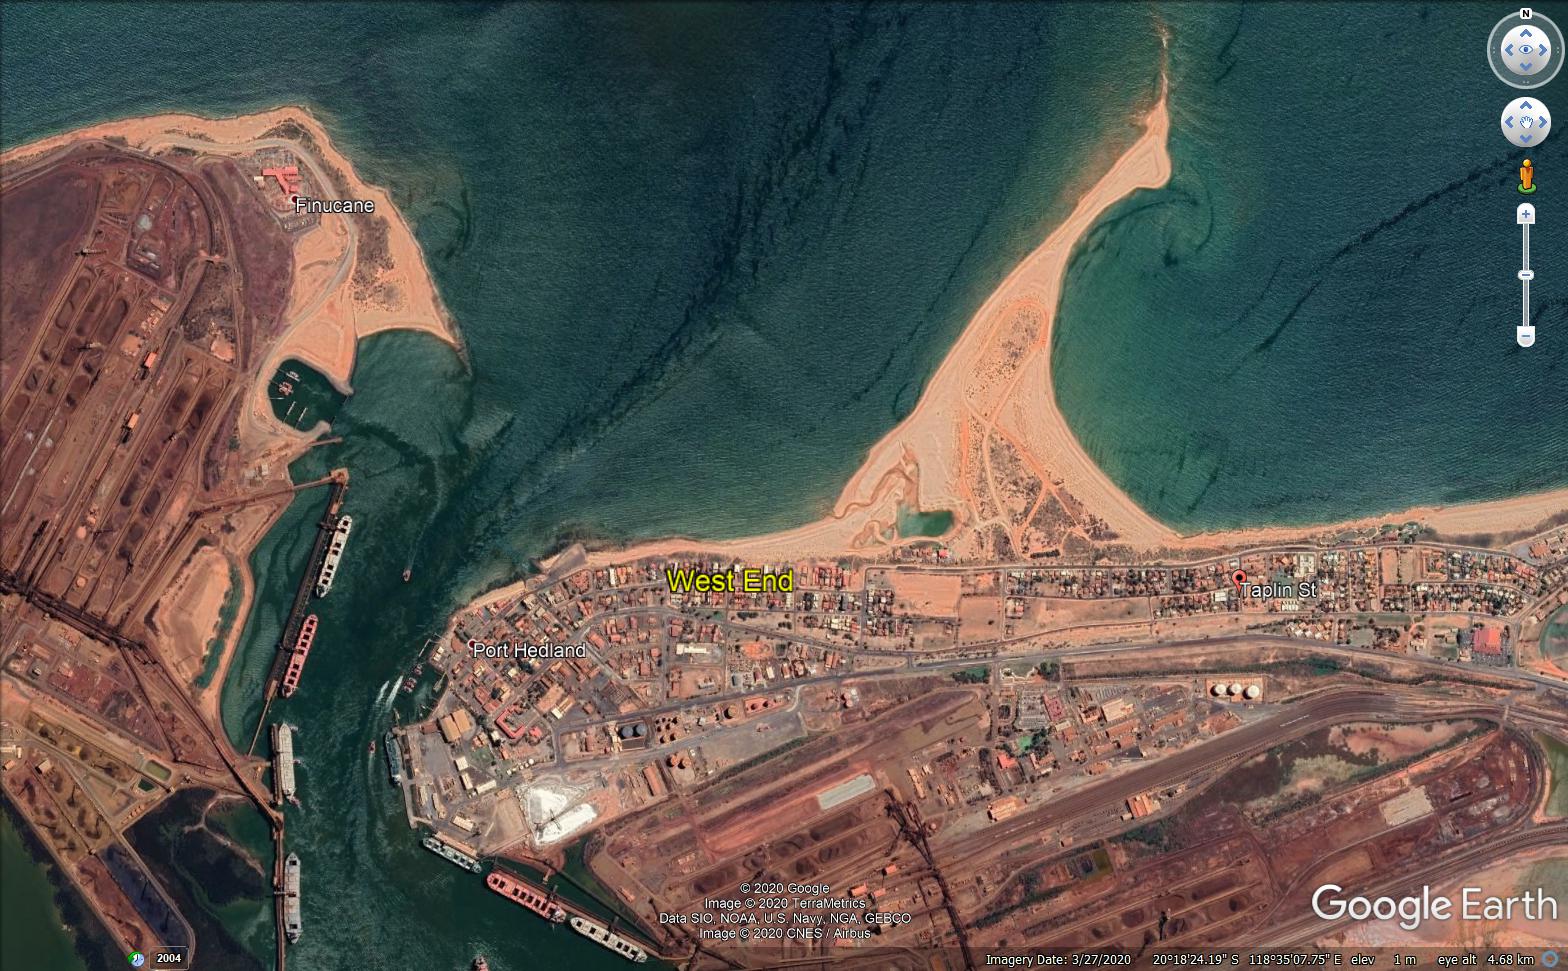 Google Earth image of the Port Hedland township west end